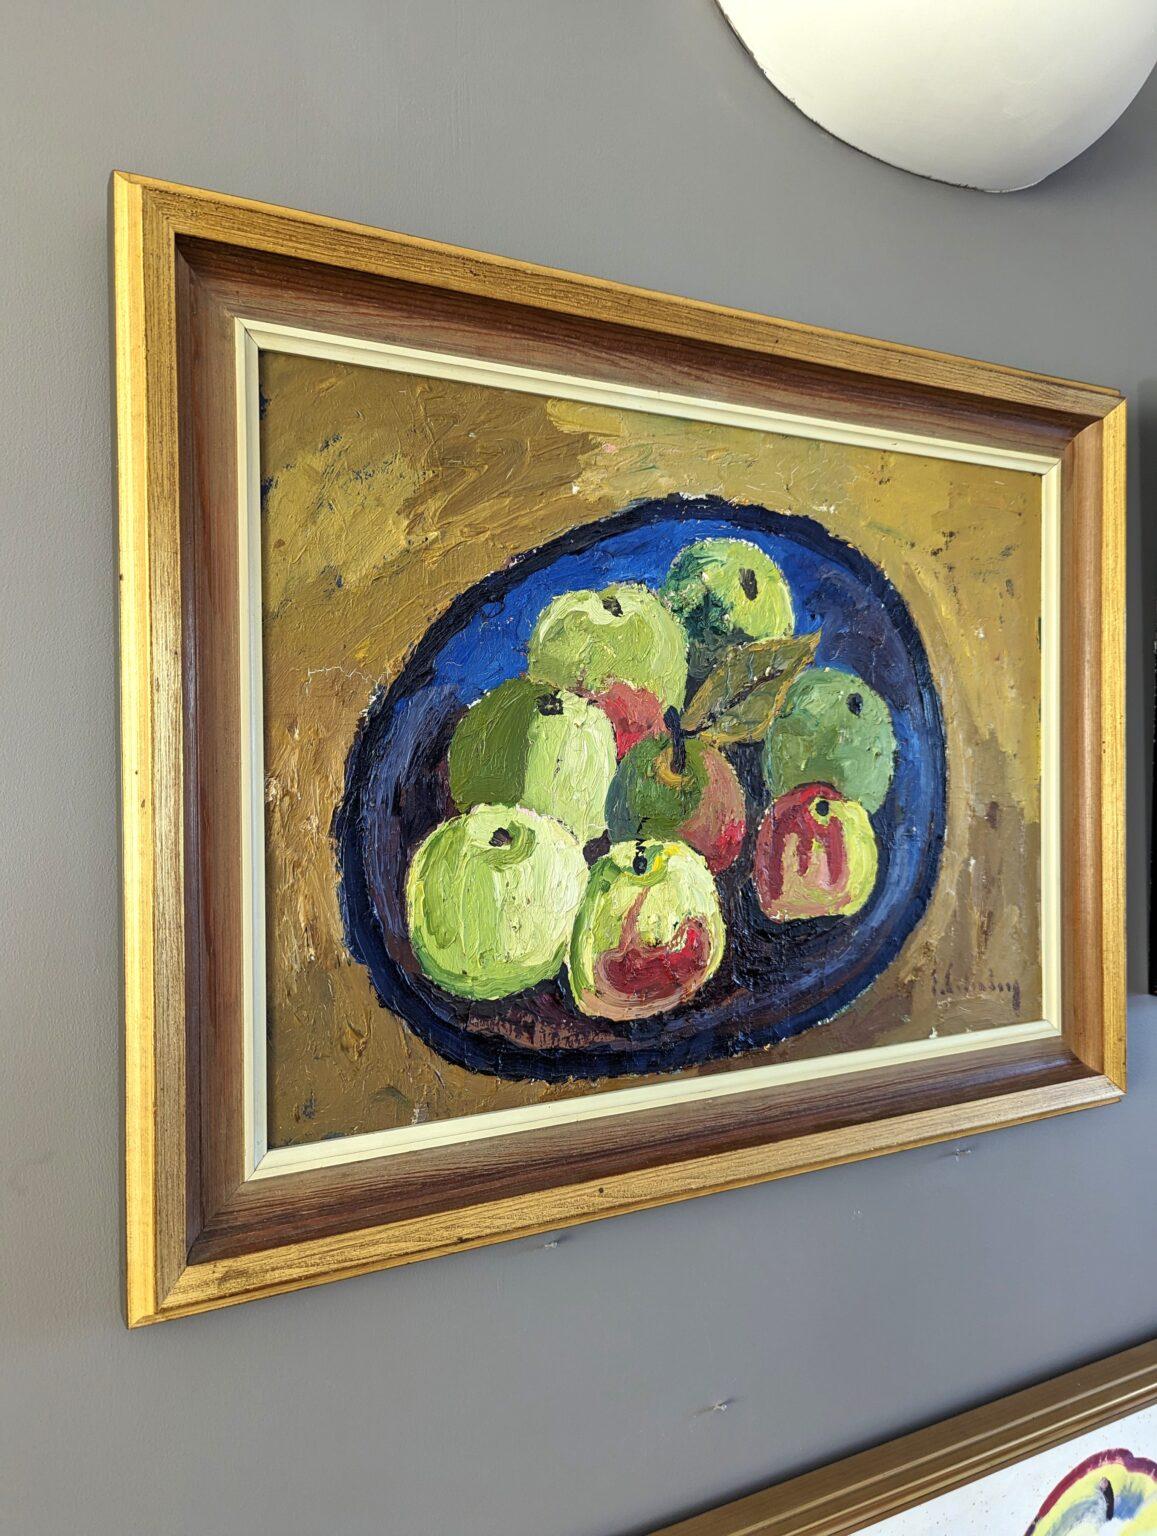 BOWL OF APPLES 
Oil on Board
Size: 43.5 x 57 cm (including frame)

An exquisite still life composition, executed in oil onto board and signed by Swedish artist Eric Cederberg (1897-1984), whose artworks have been represented in several public and